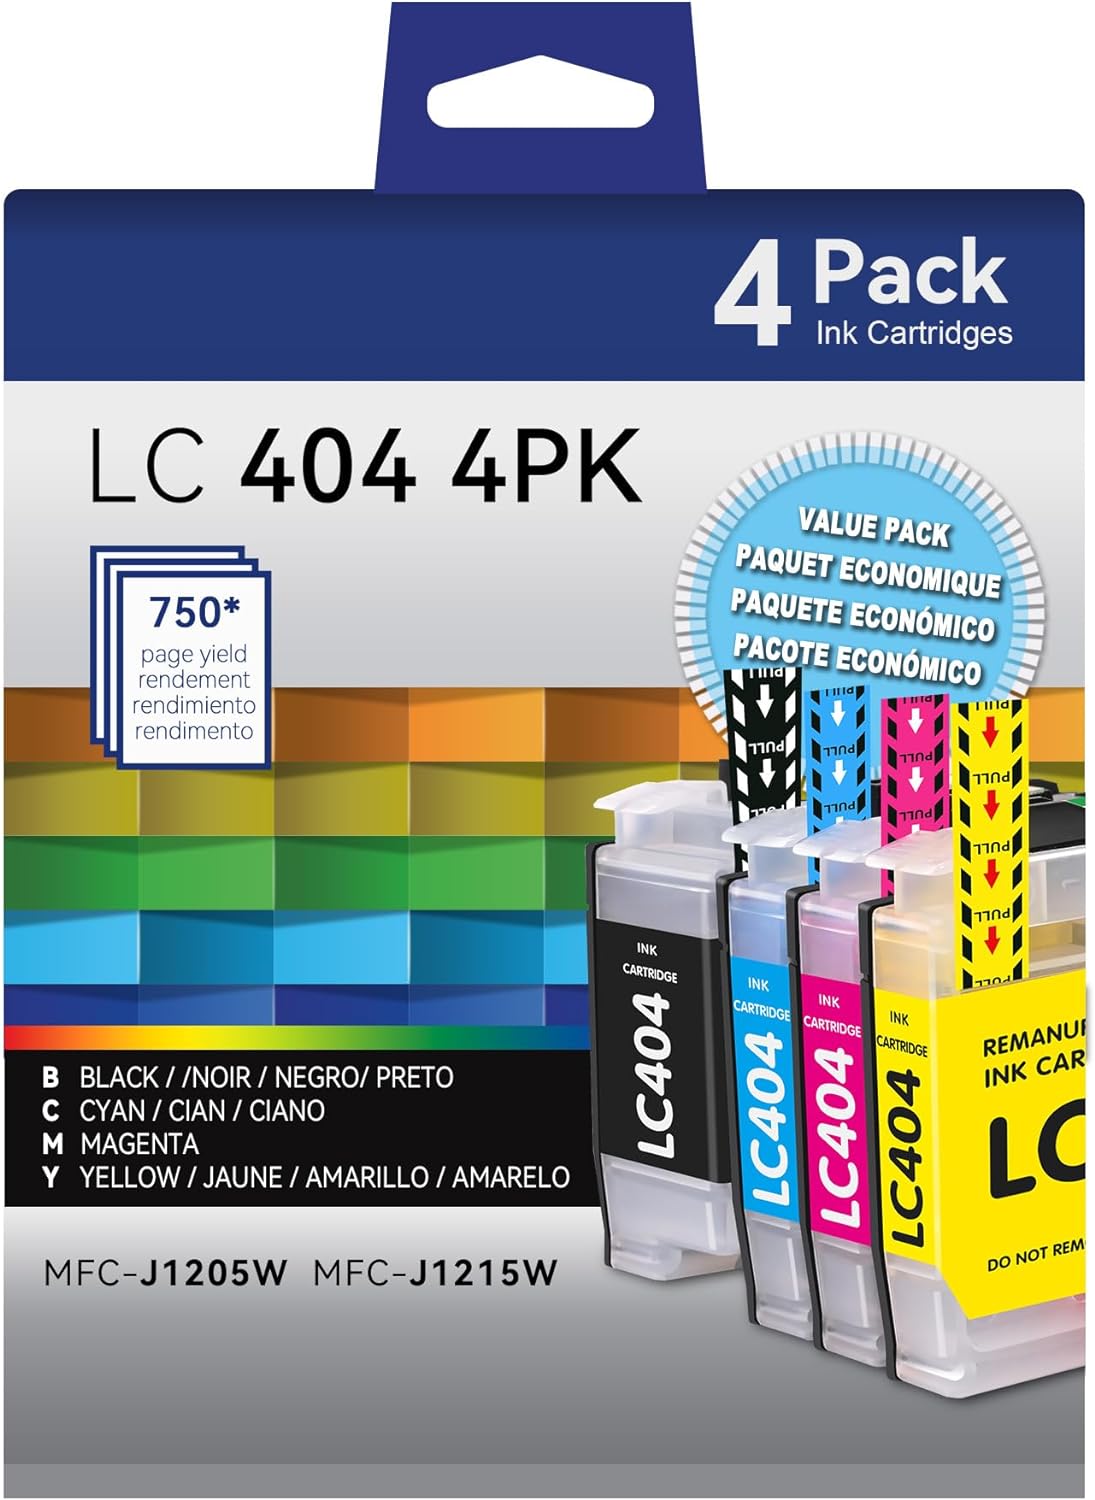 Limited-Time Offer: LC404 Ink Cartridges Replacement - 45% Off!